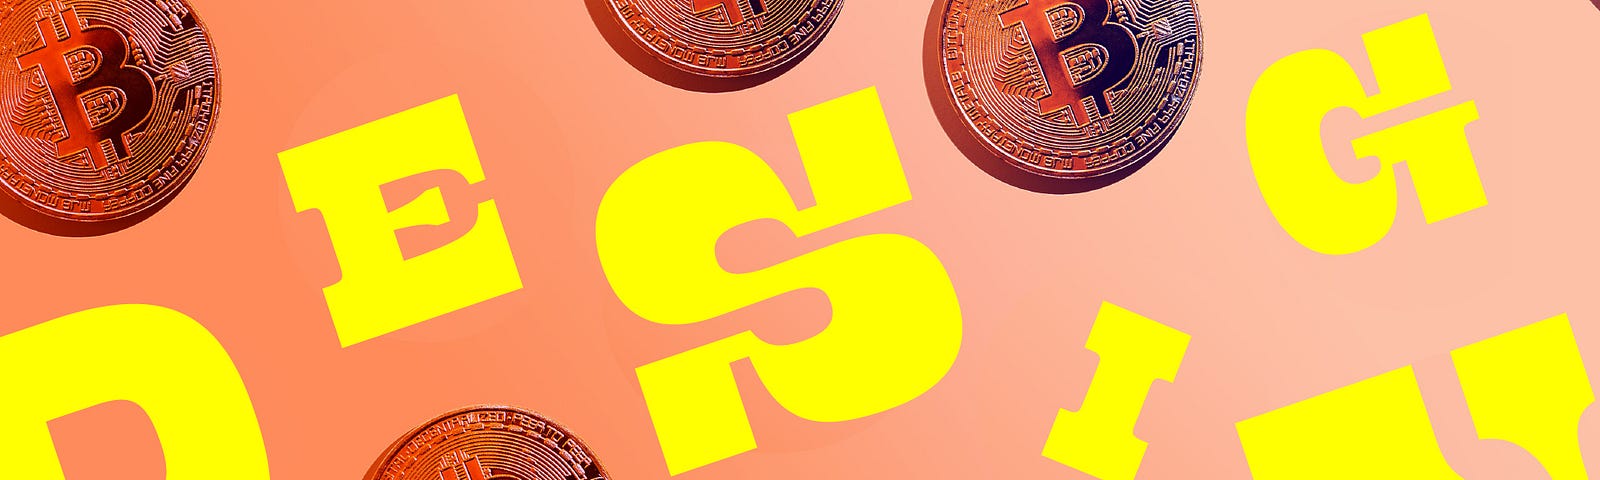 floating bitcoins with “design” written alongside them.